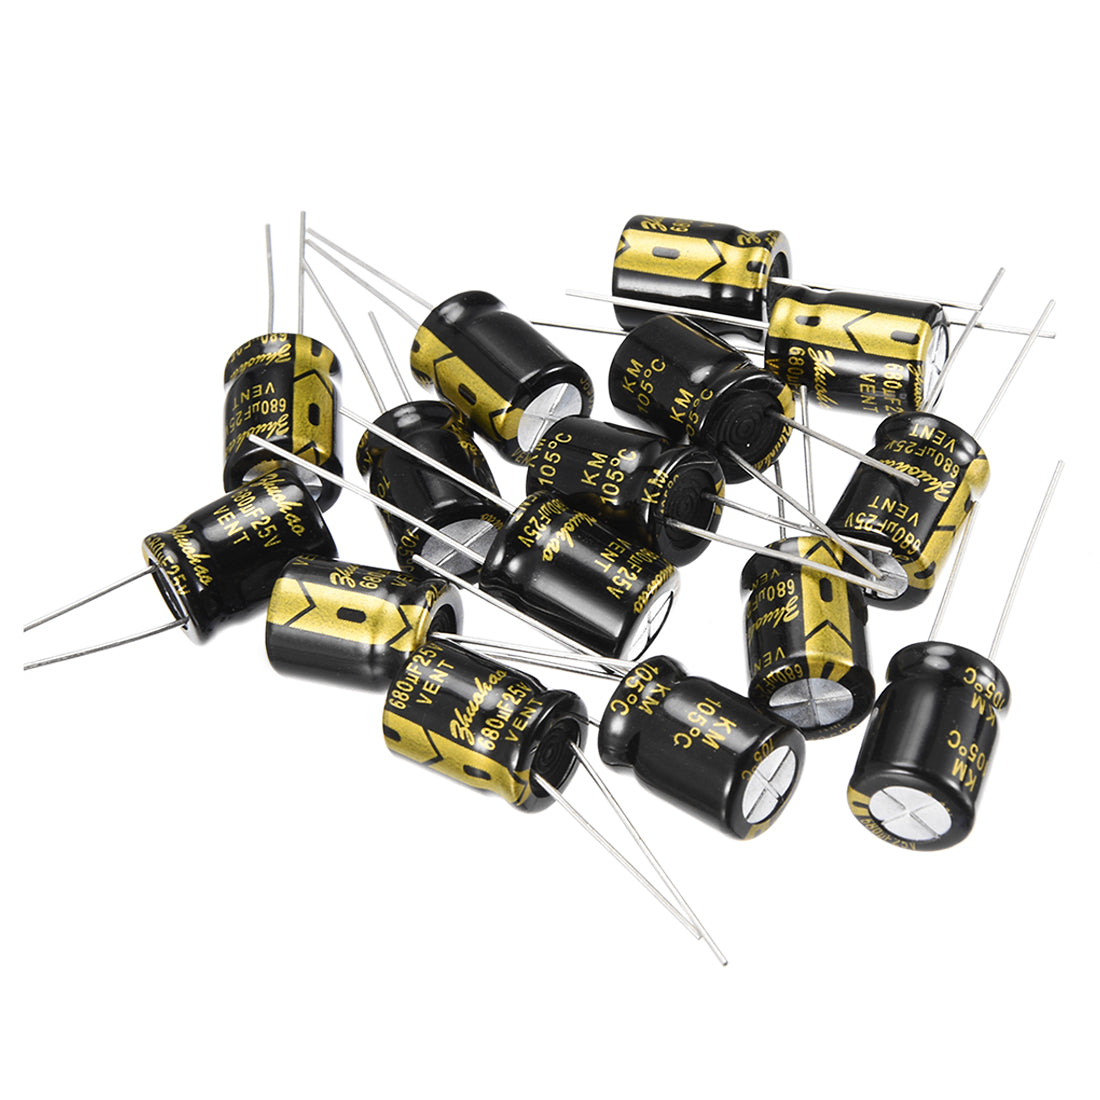 uxcell Uxcell Aluminum Radial Electrolytic Capacitor with 680uF 25V 105 Celsius Life 2000H 10 x 13 mm Black 15pcs